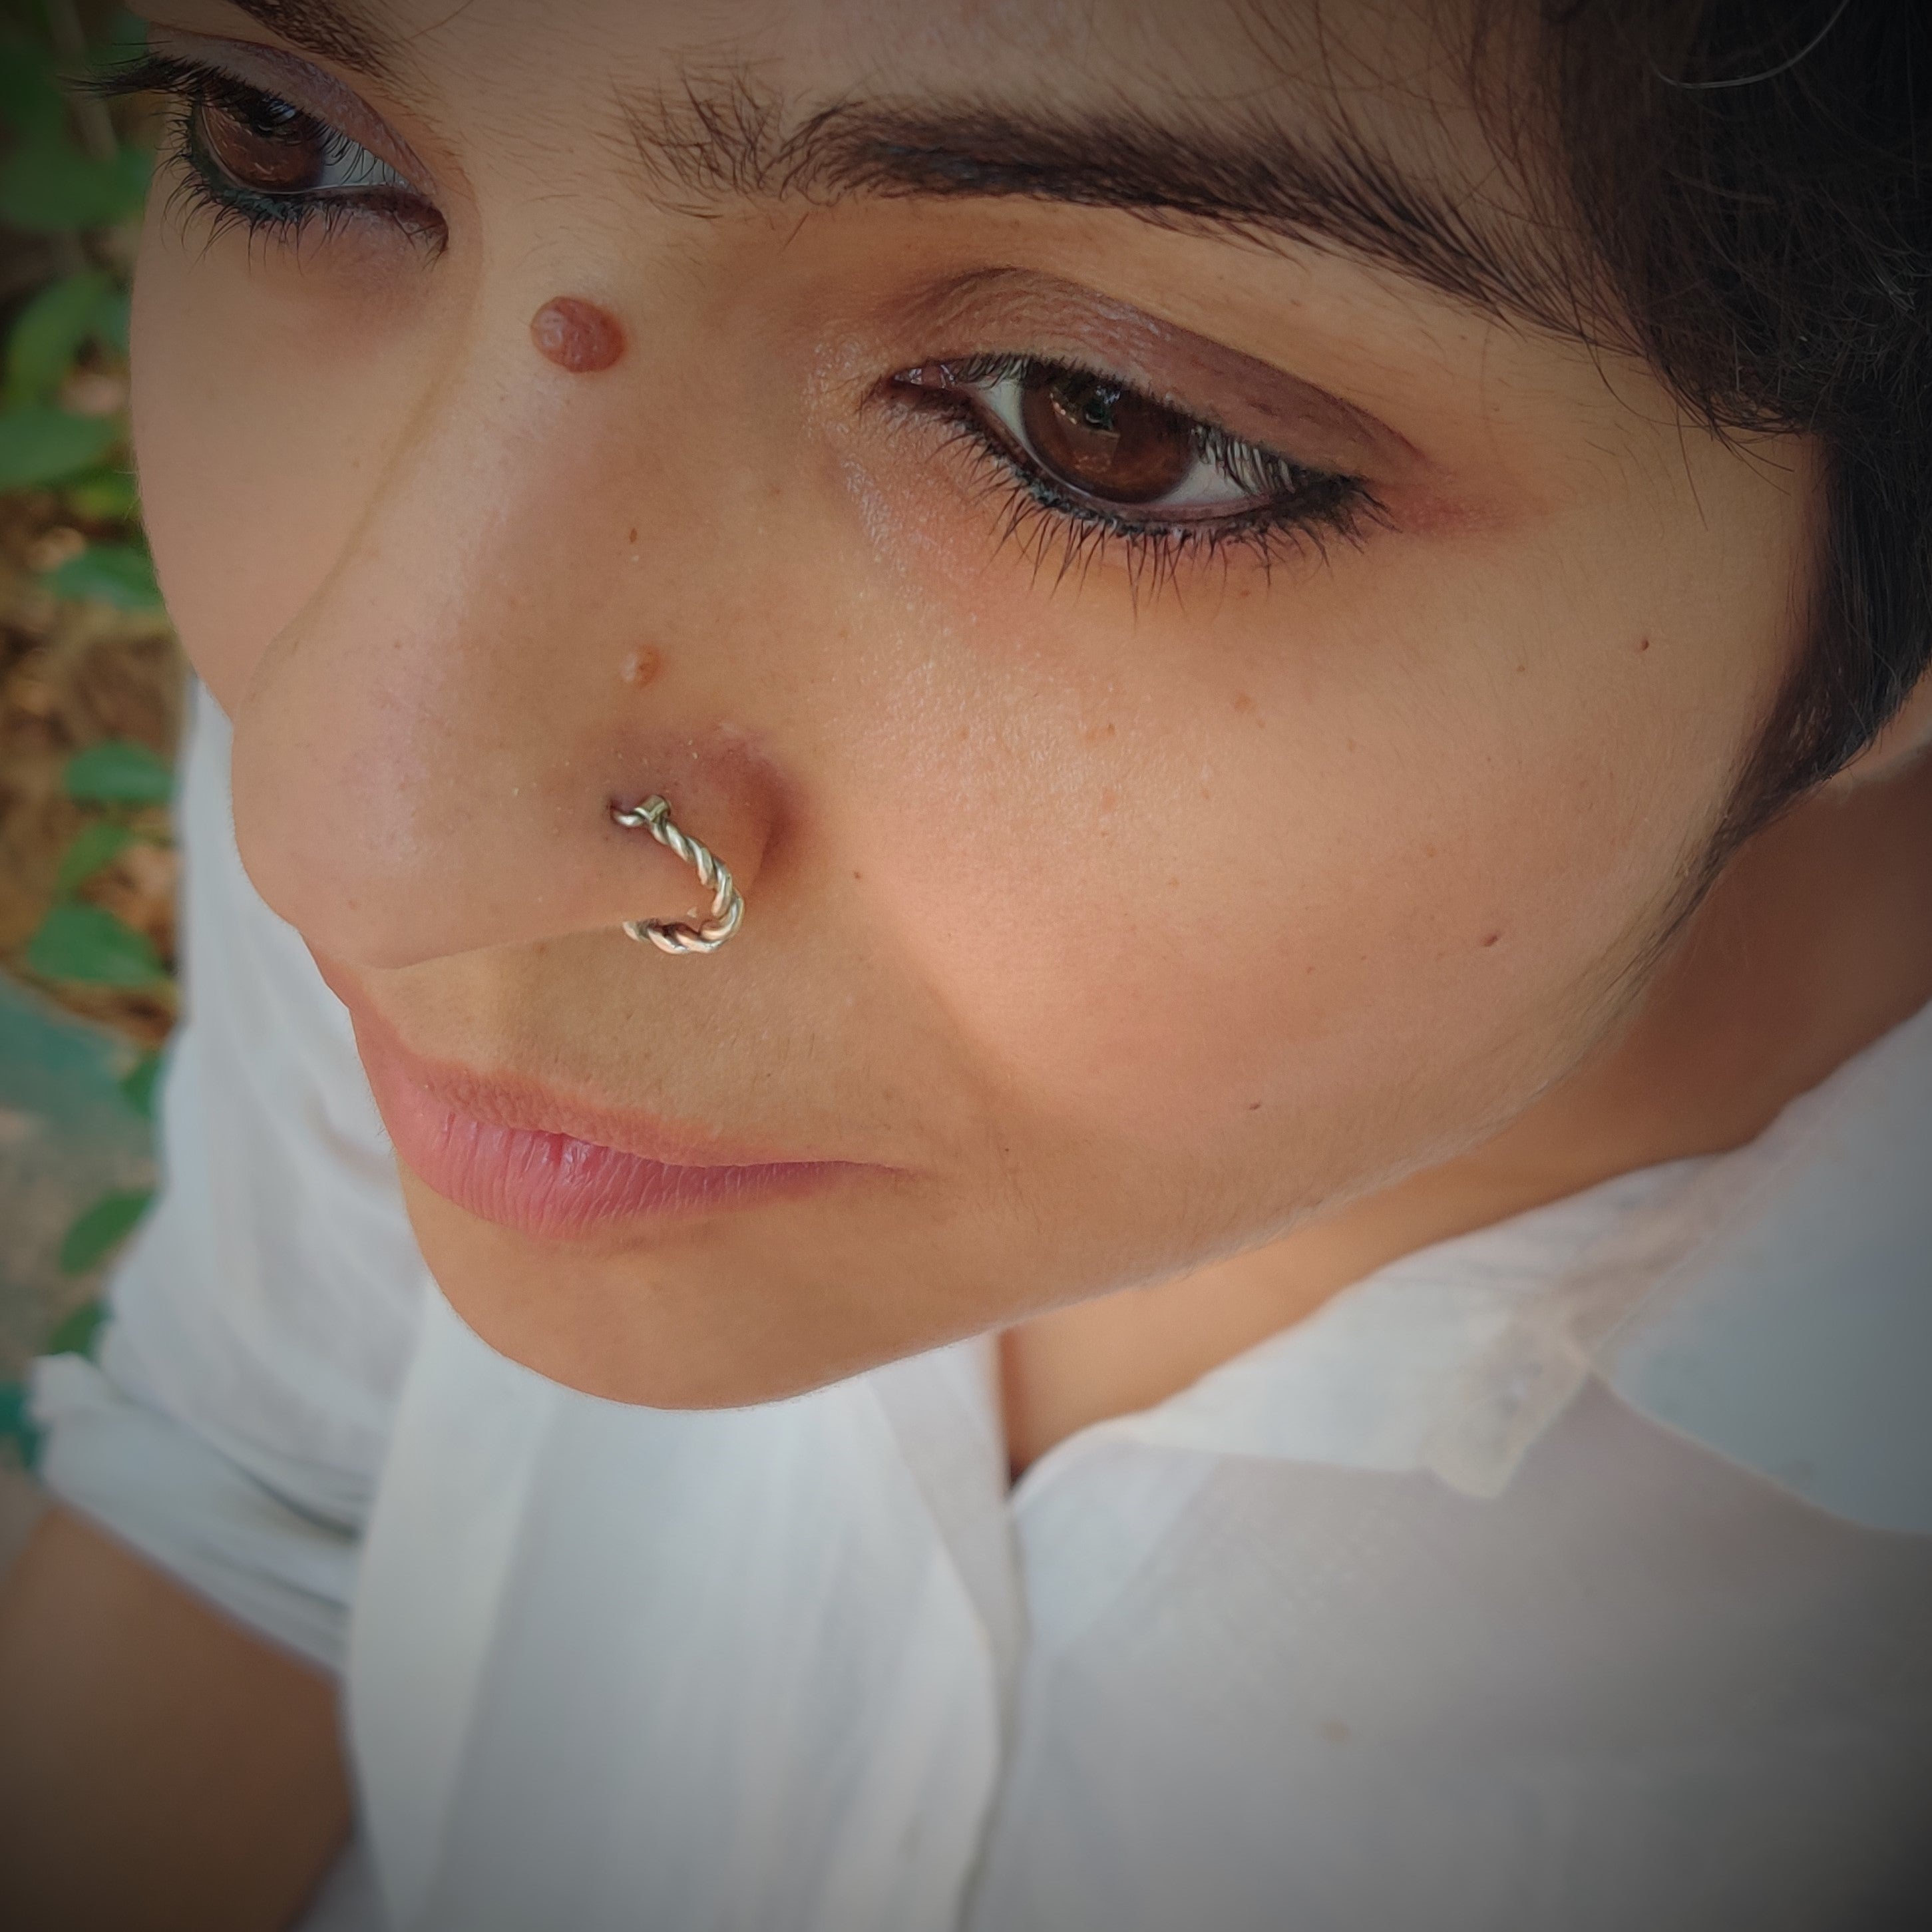 Buy Nose Rings Online India | Fake Nose Rings - The Ethereal Store